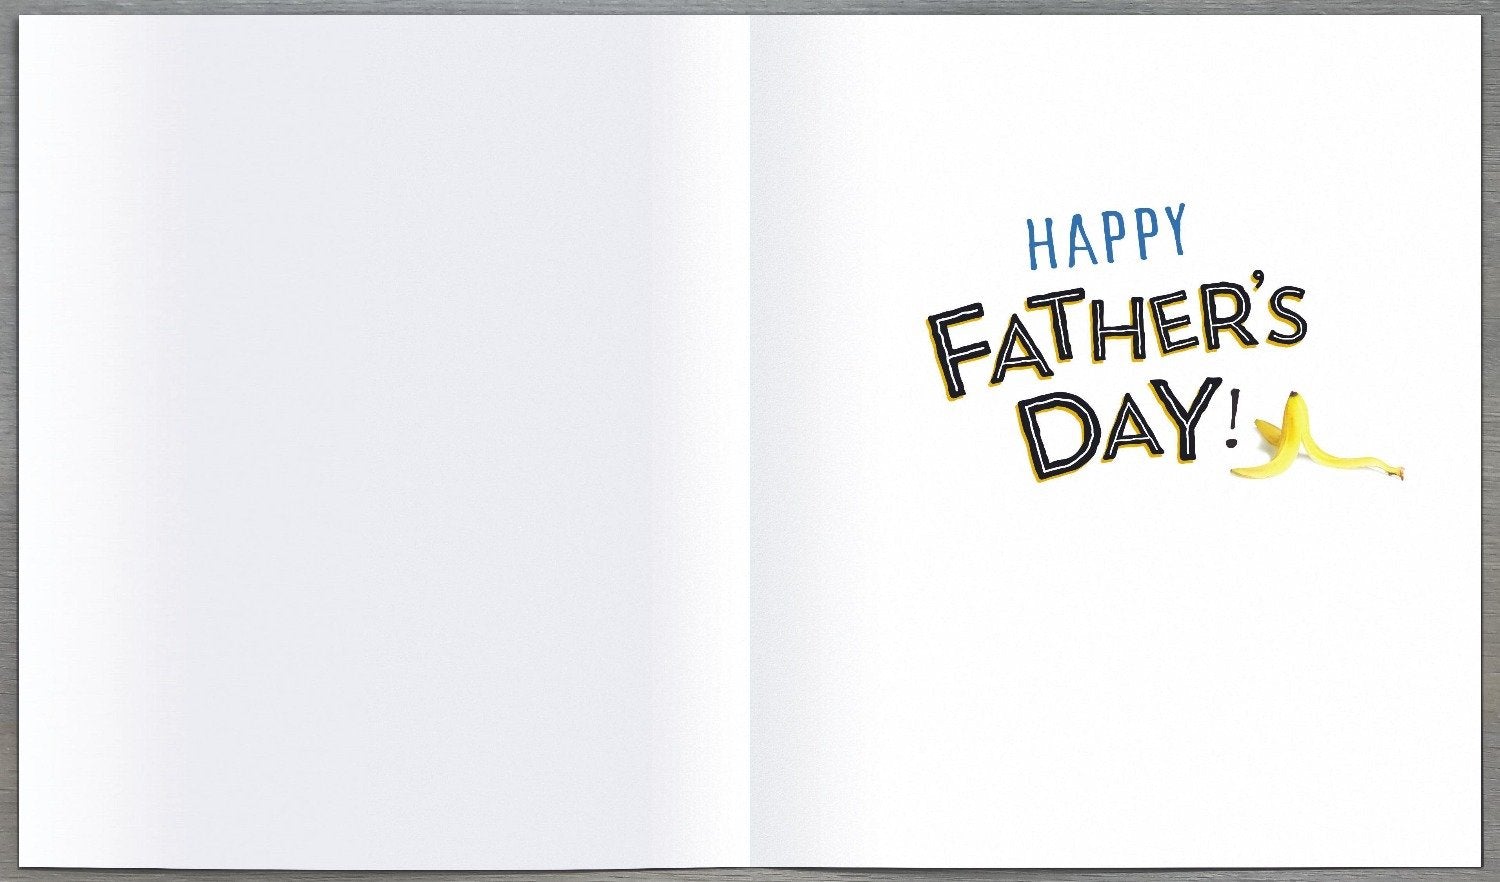 Fathers Day Card - Grandad / A Laughing Monkey Holding A Gold Trophy